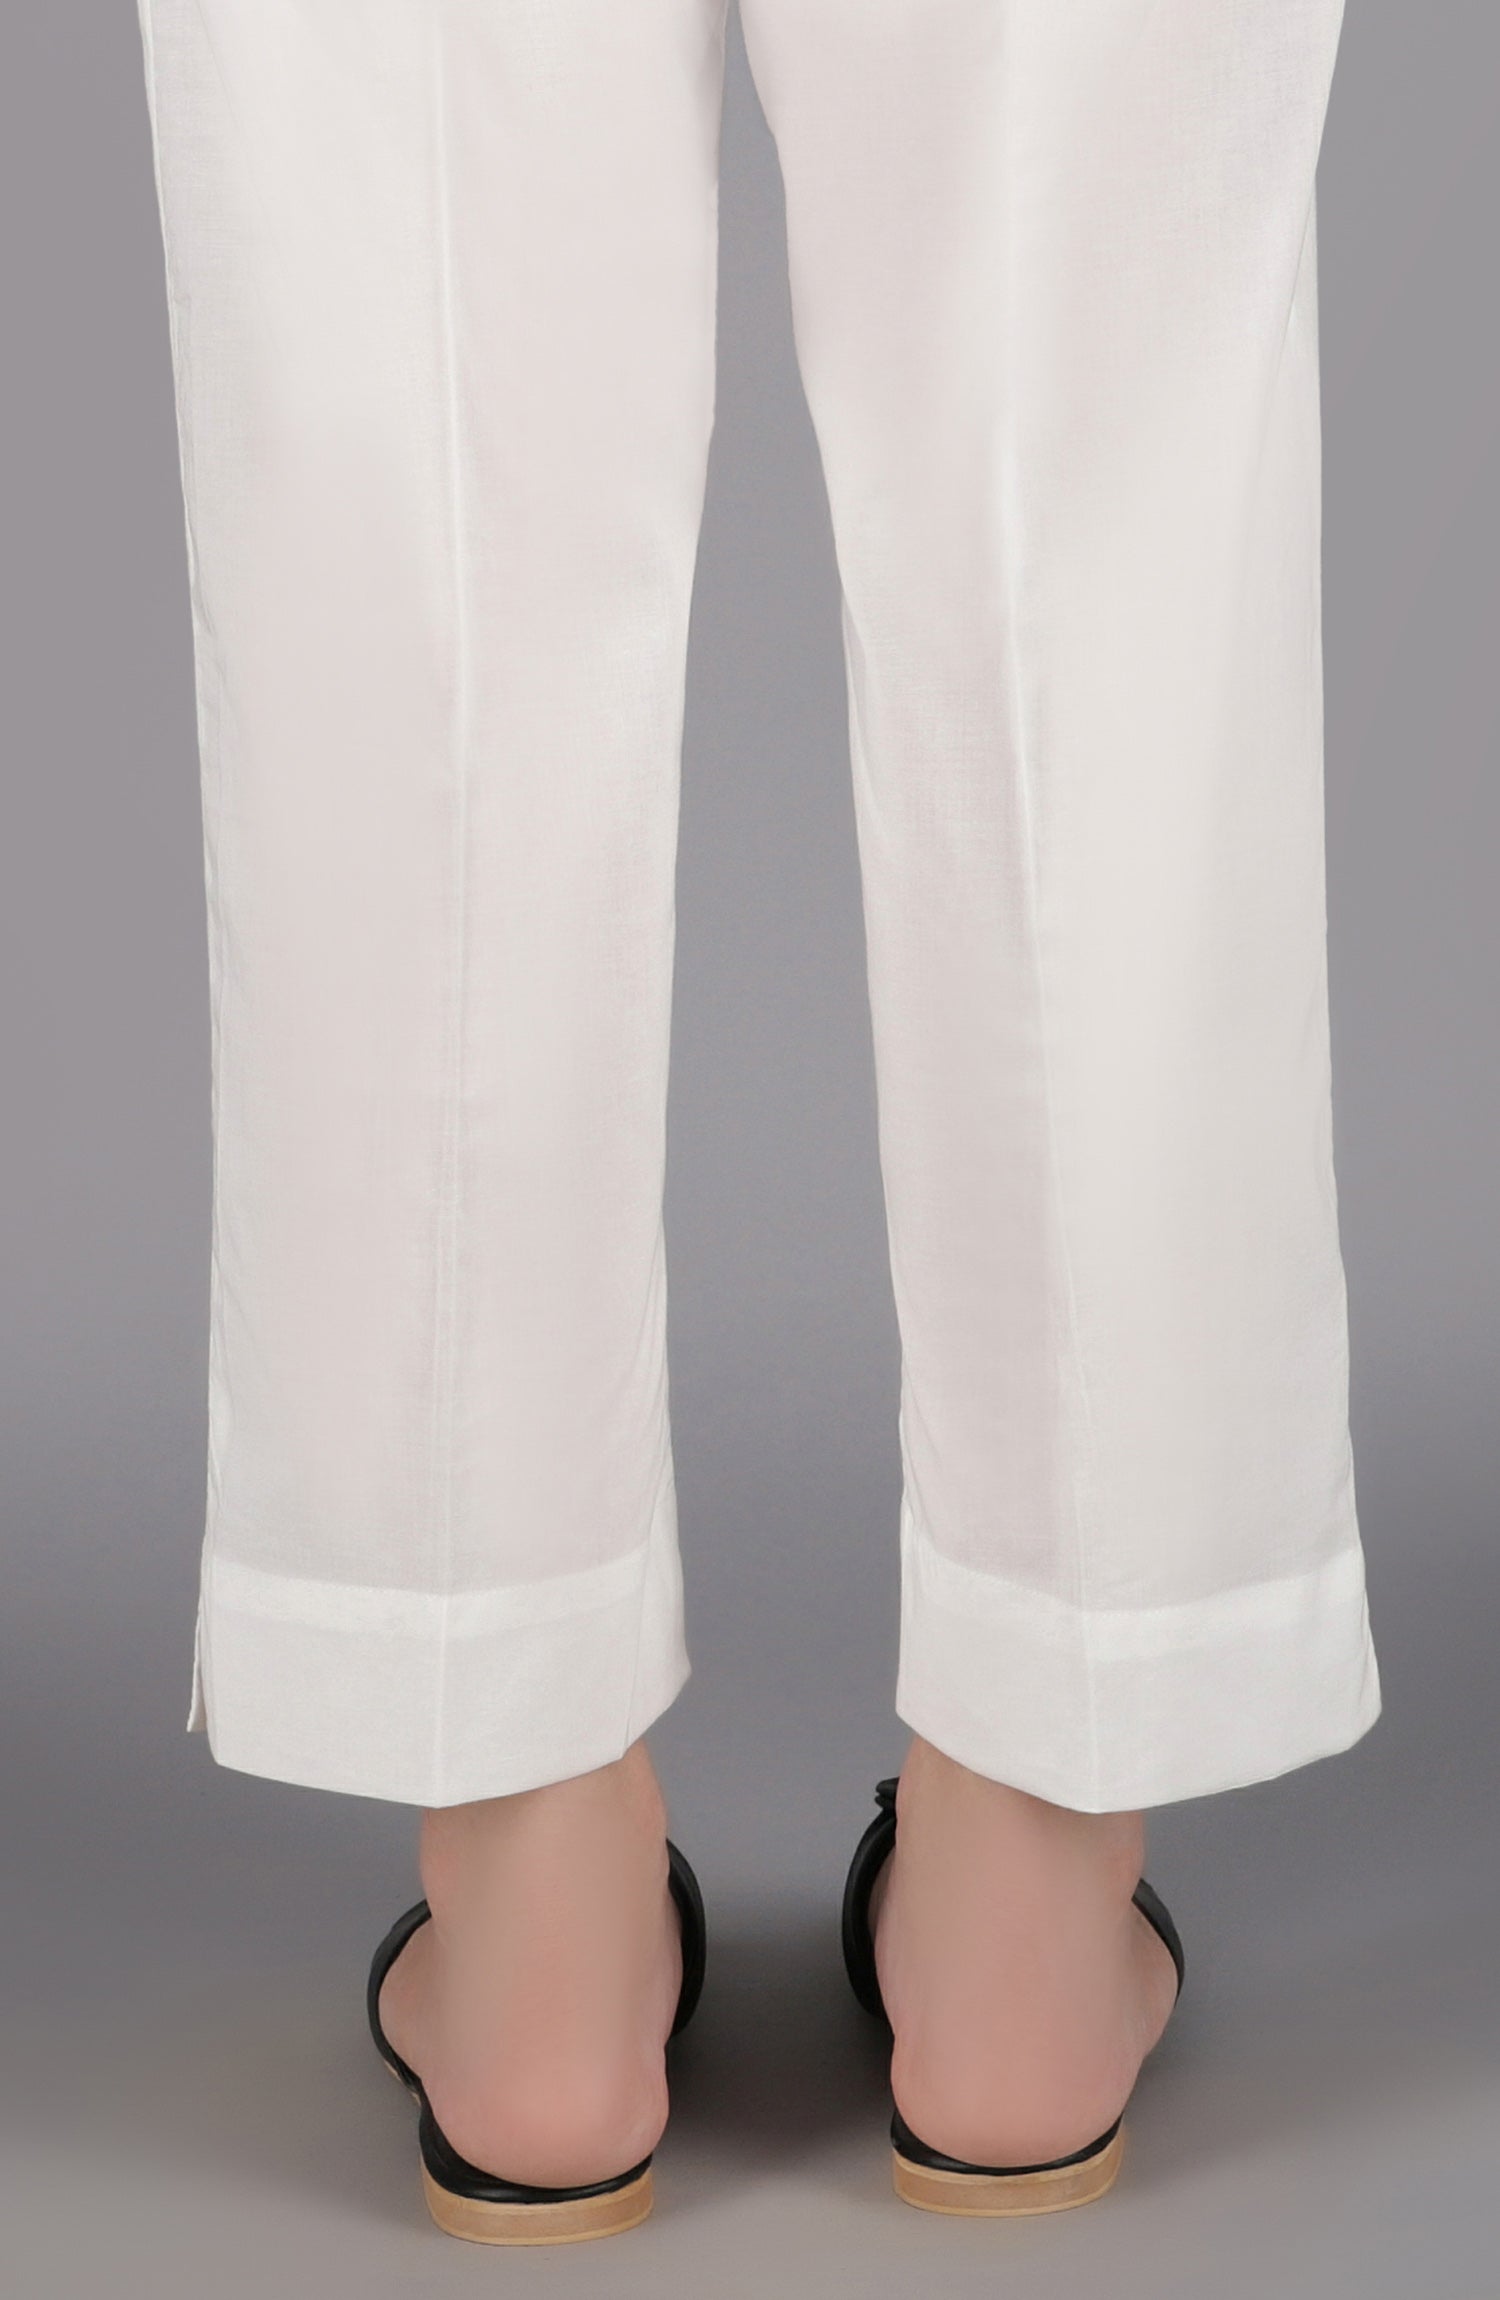 NRP-104/S WHITE CAMBRIC SCPANTS STITCHED BOTTOMS PANTS